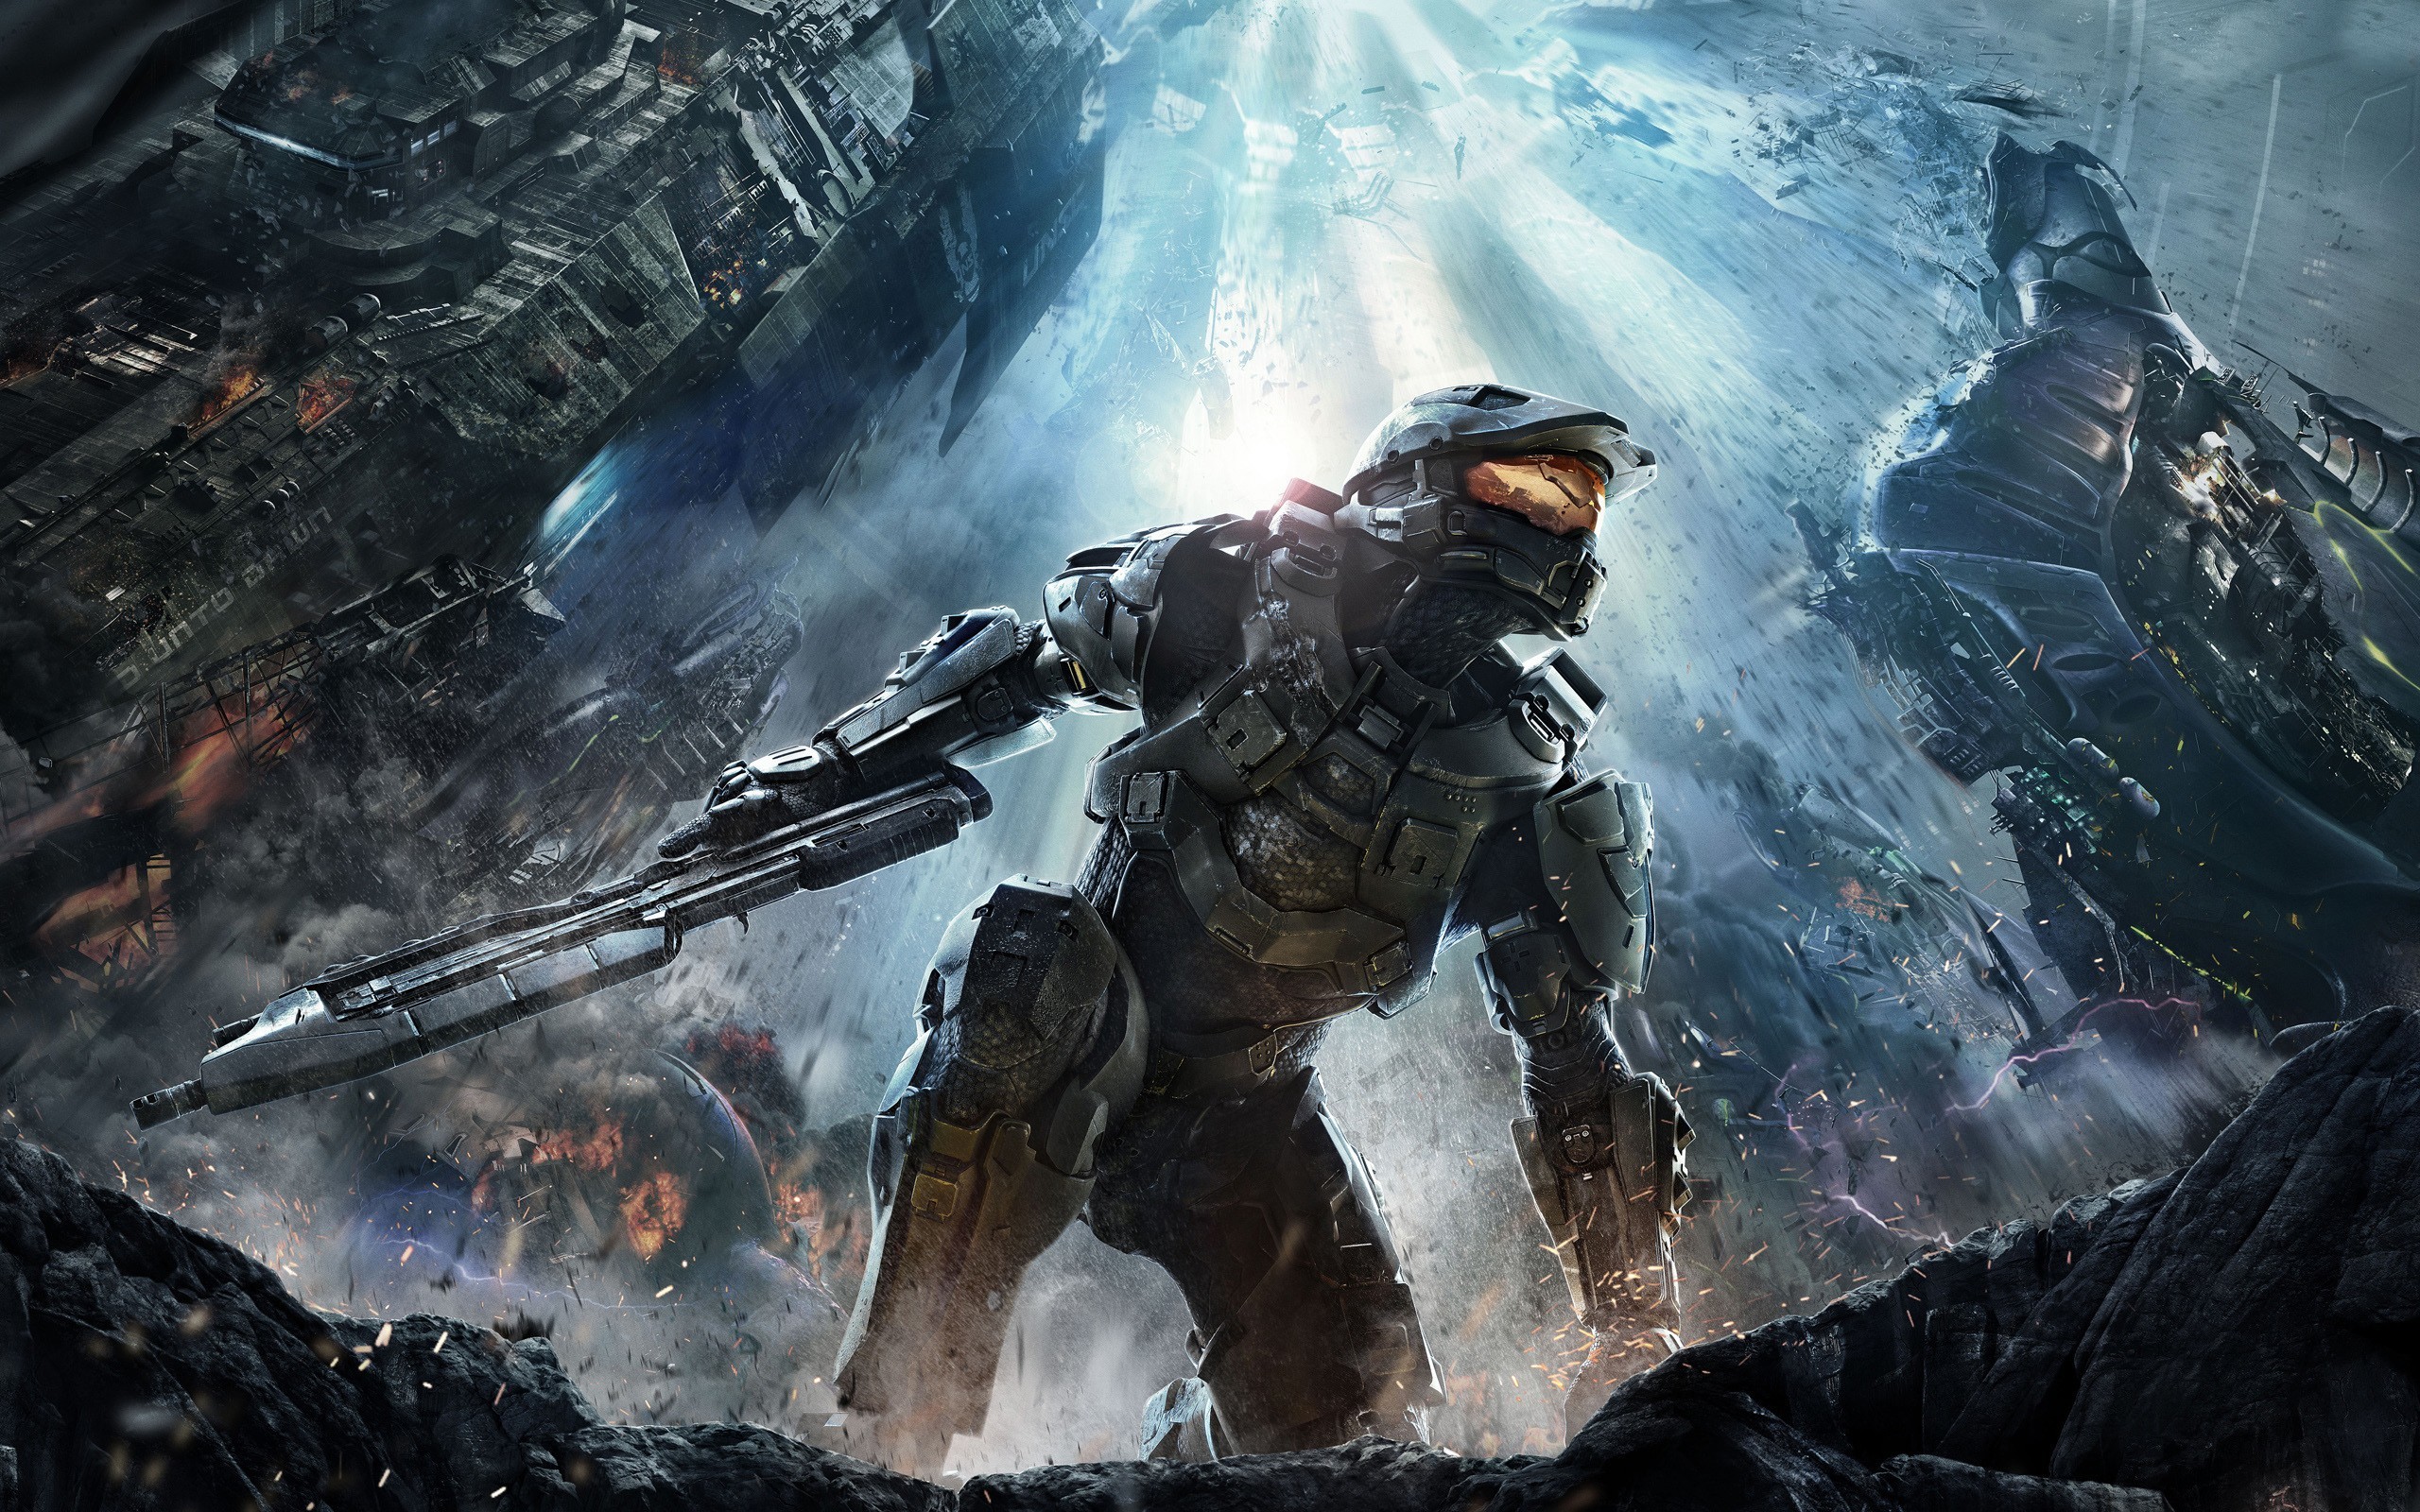 2560x1600 Halo-5-Master-Chief-Wide-Wallpapers.jpg (2560Ã1600) | Wallpaper Desktop |  Pinterest | Mobile wallpaper, Wallpaper and Wallpaper desktop